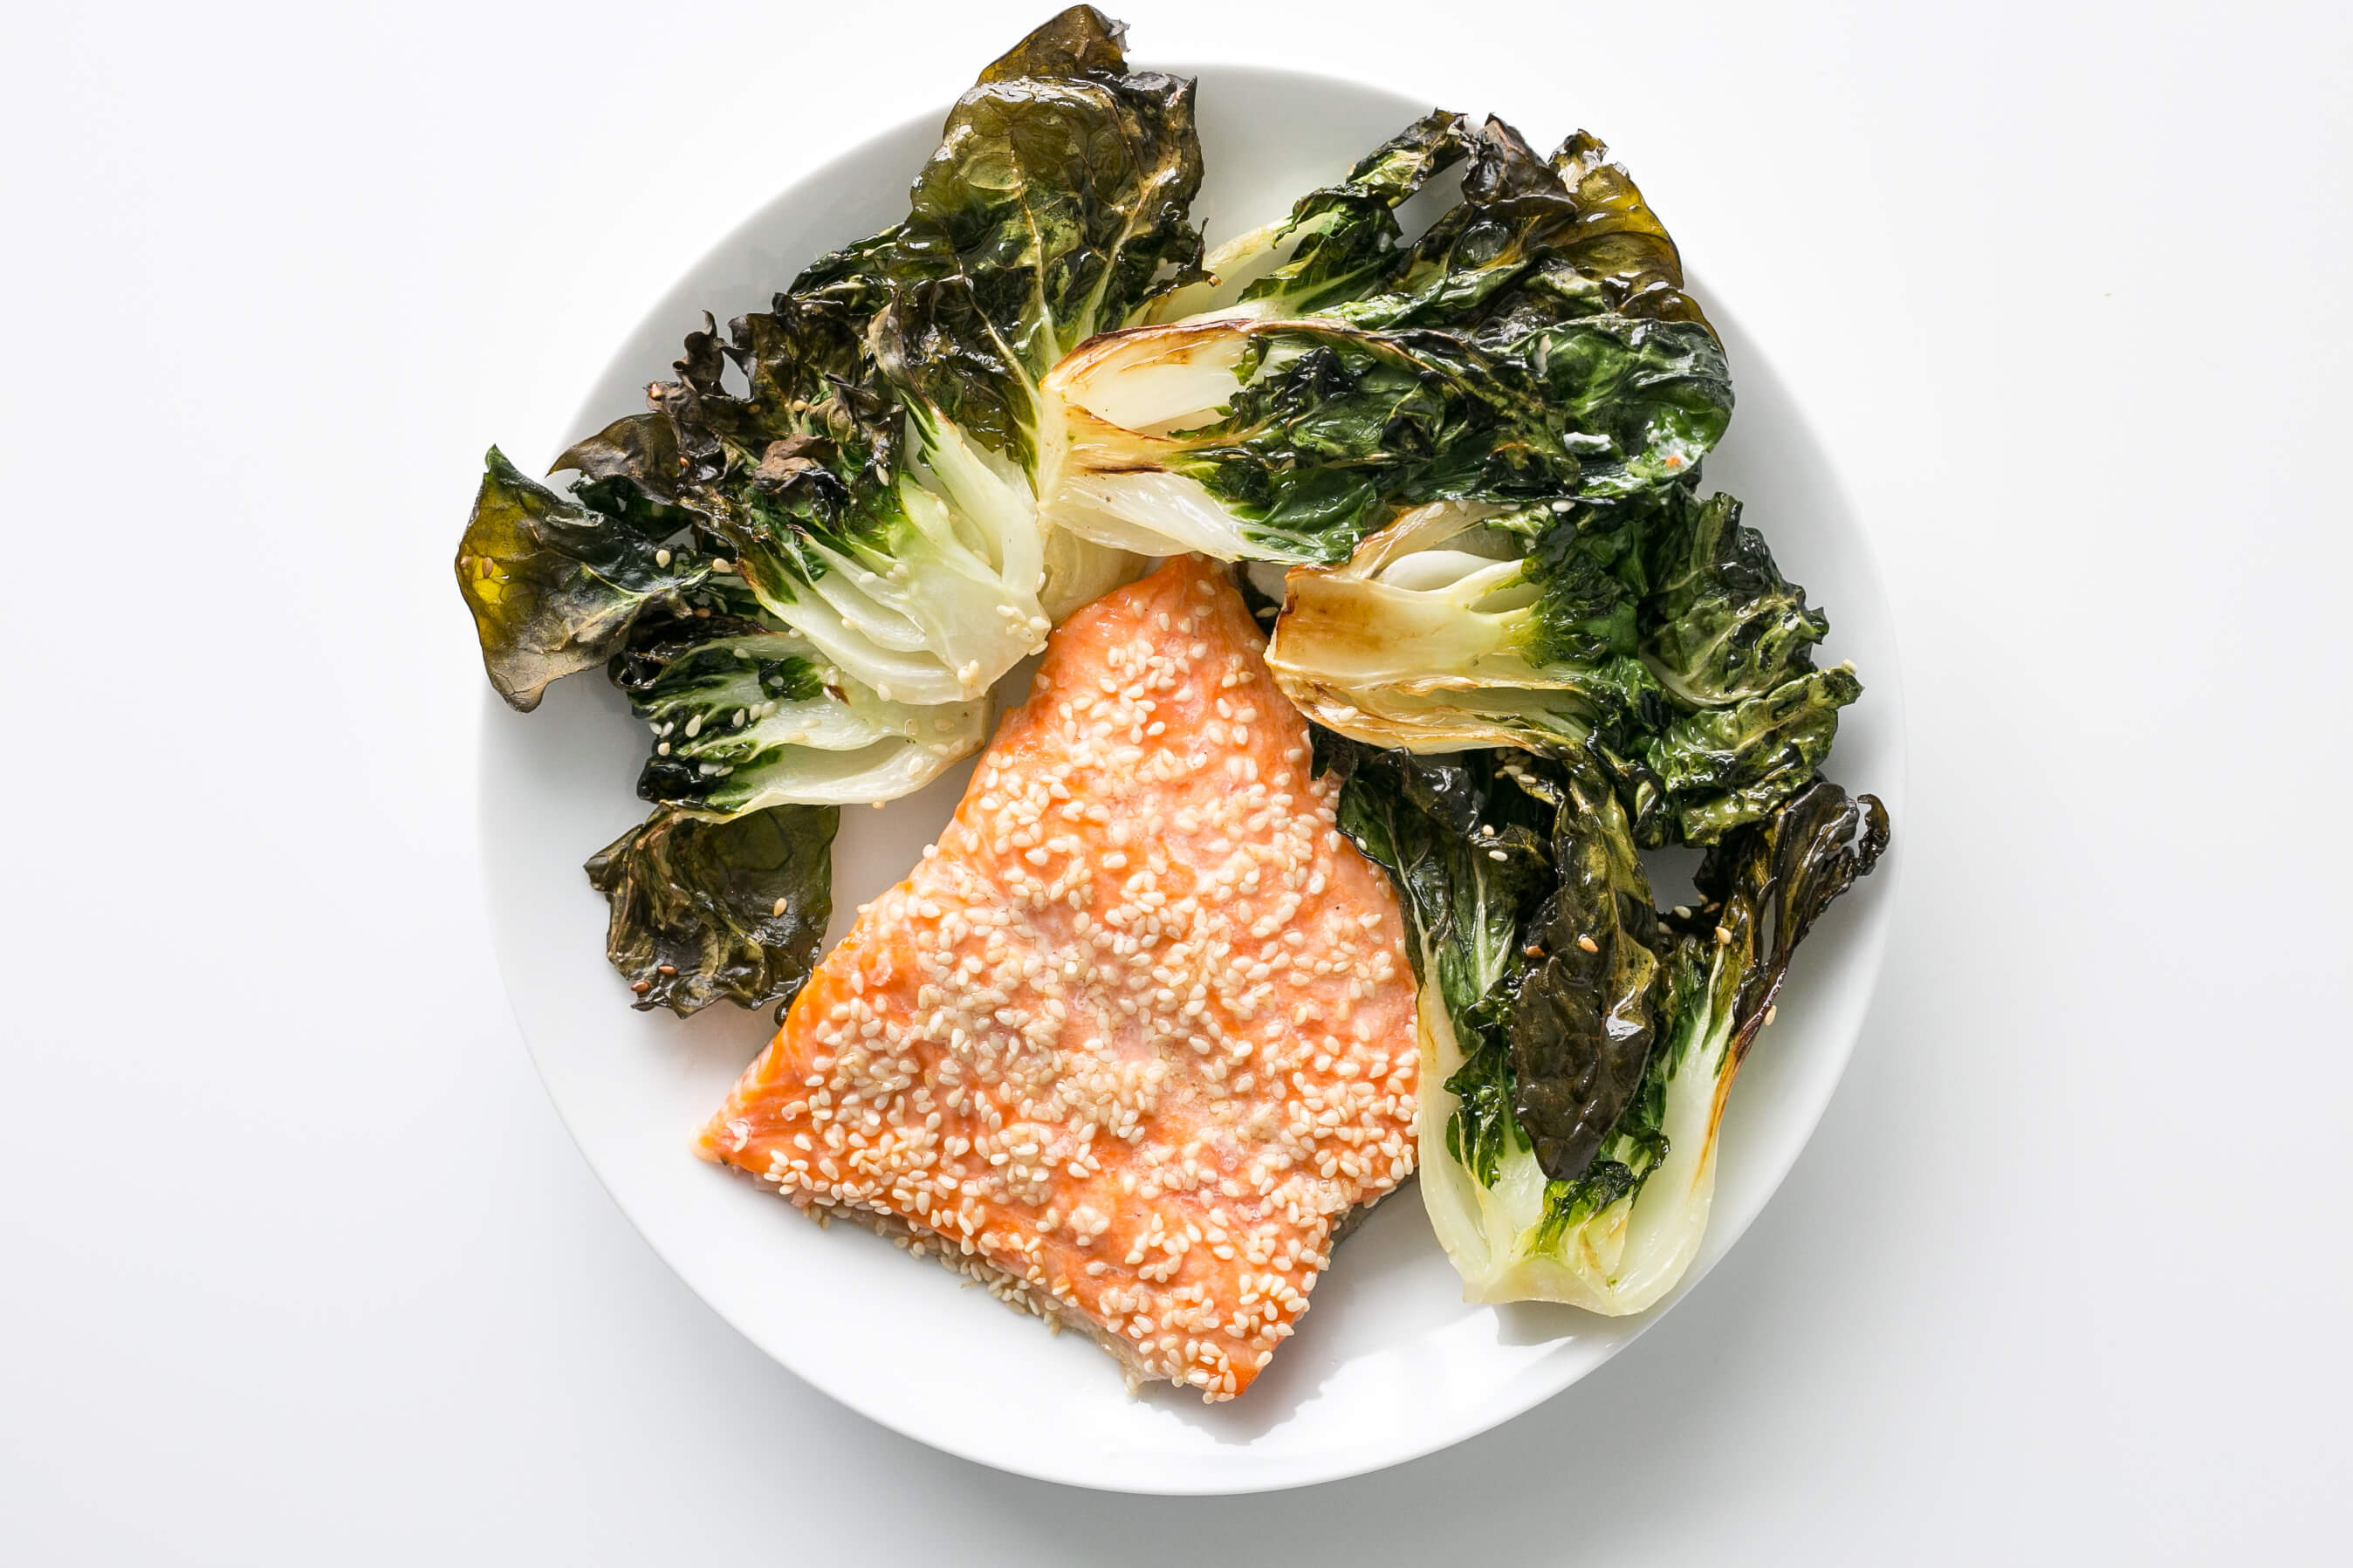 5 Ingredient Meal Ideas Your Clients Will Love: One Pan Sesame Trout & Bok Choy